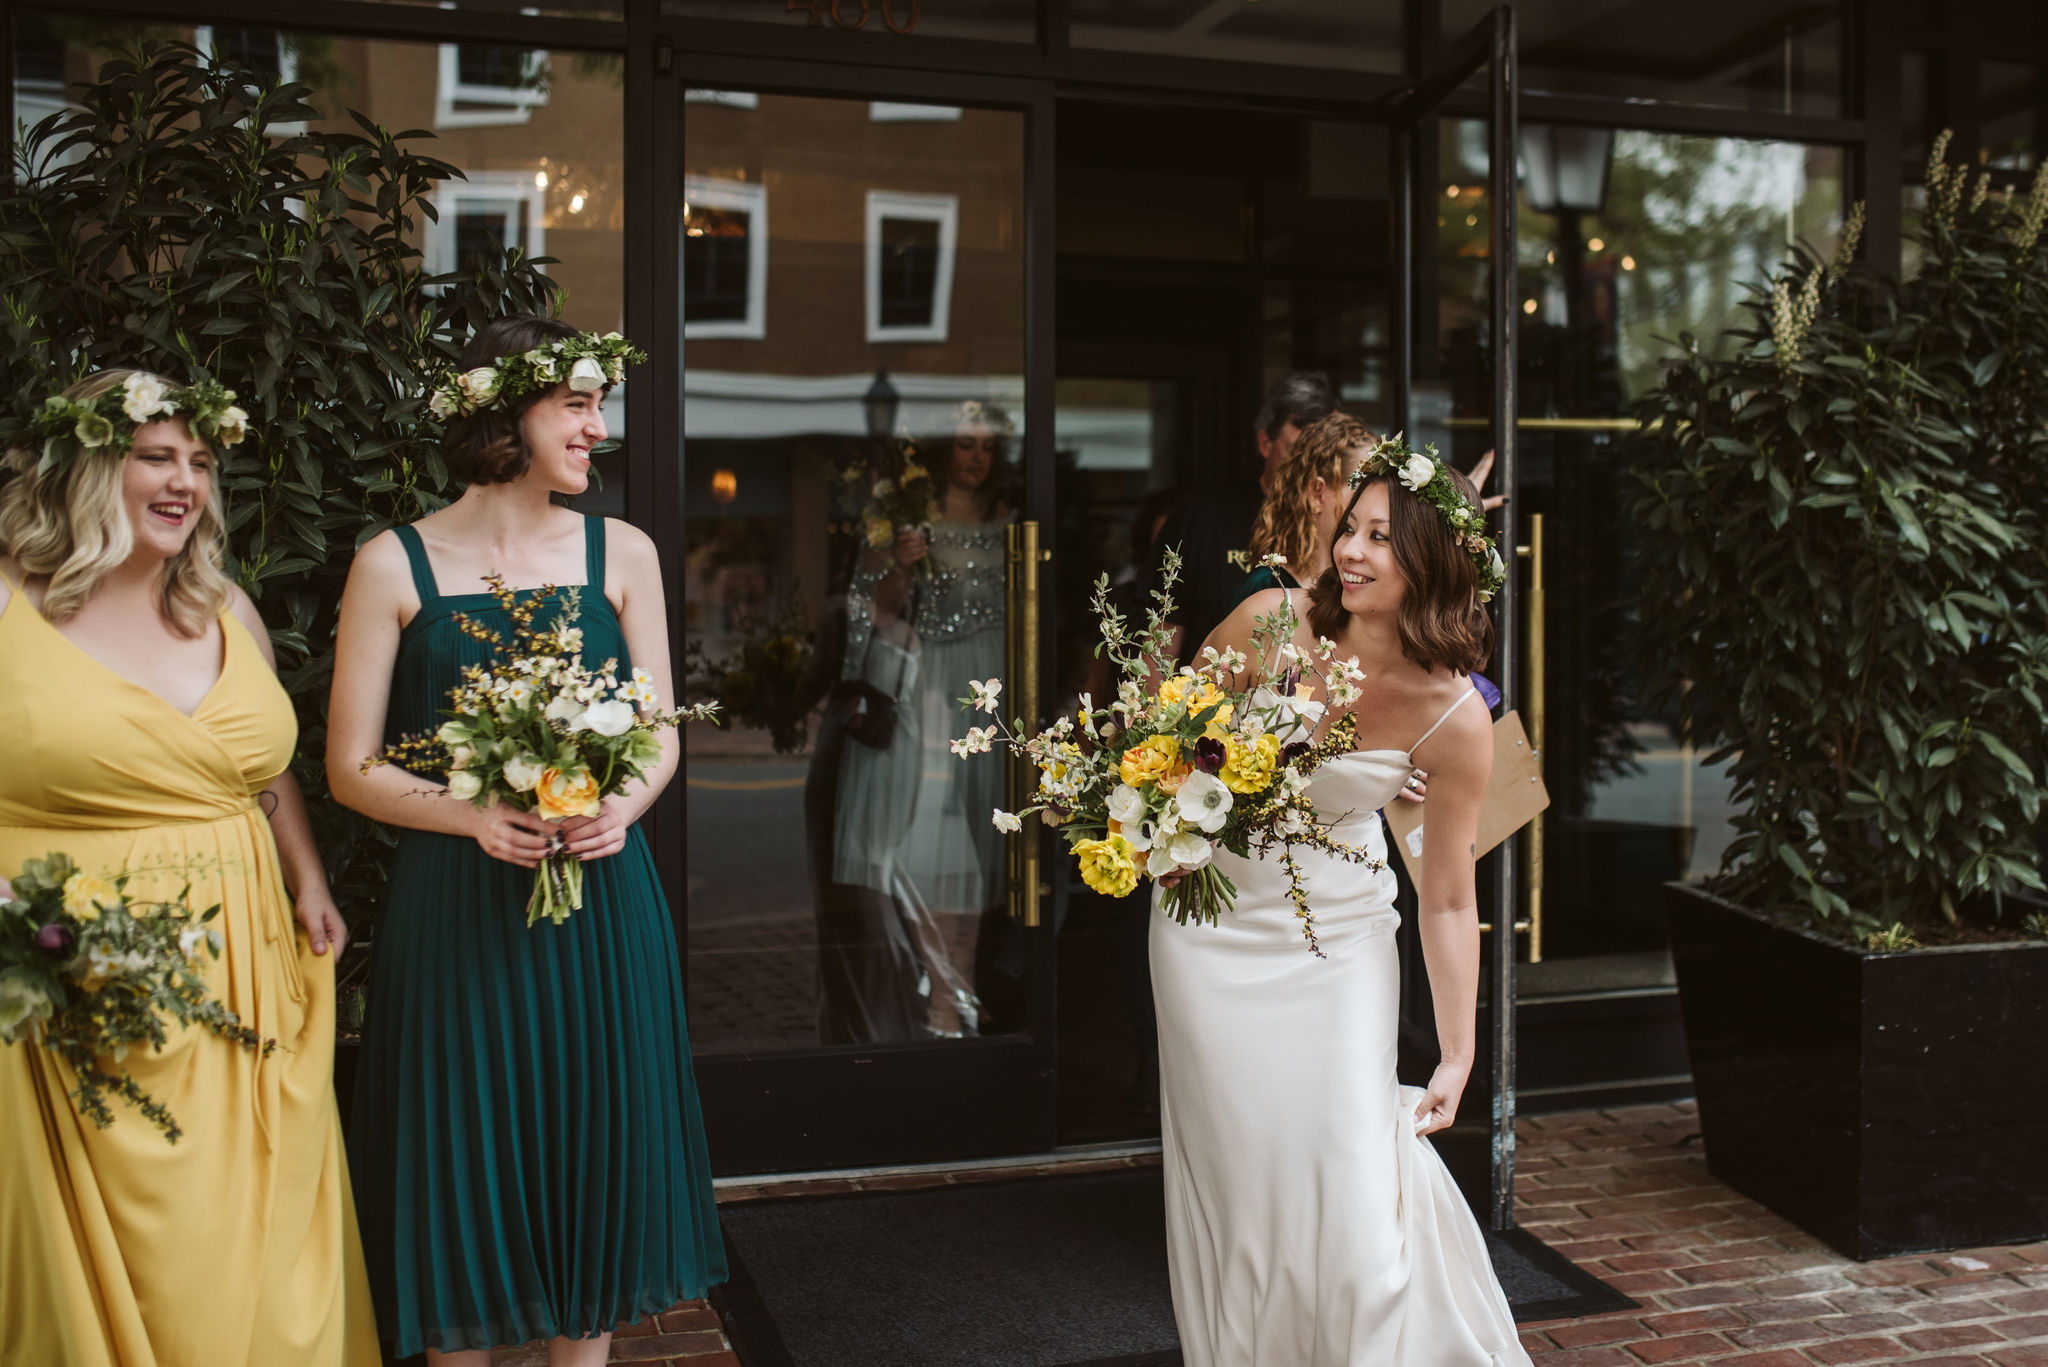  Washington DC, Baltimore Wedding Photographer, Alexandria, Old Town, Jewel Tone, Romantic, Modern, The Alexandrian Autograph Collection Hotel, Bride and bridesmaids meeting outside to walk to venue, Sungold Flower Co 